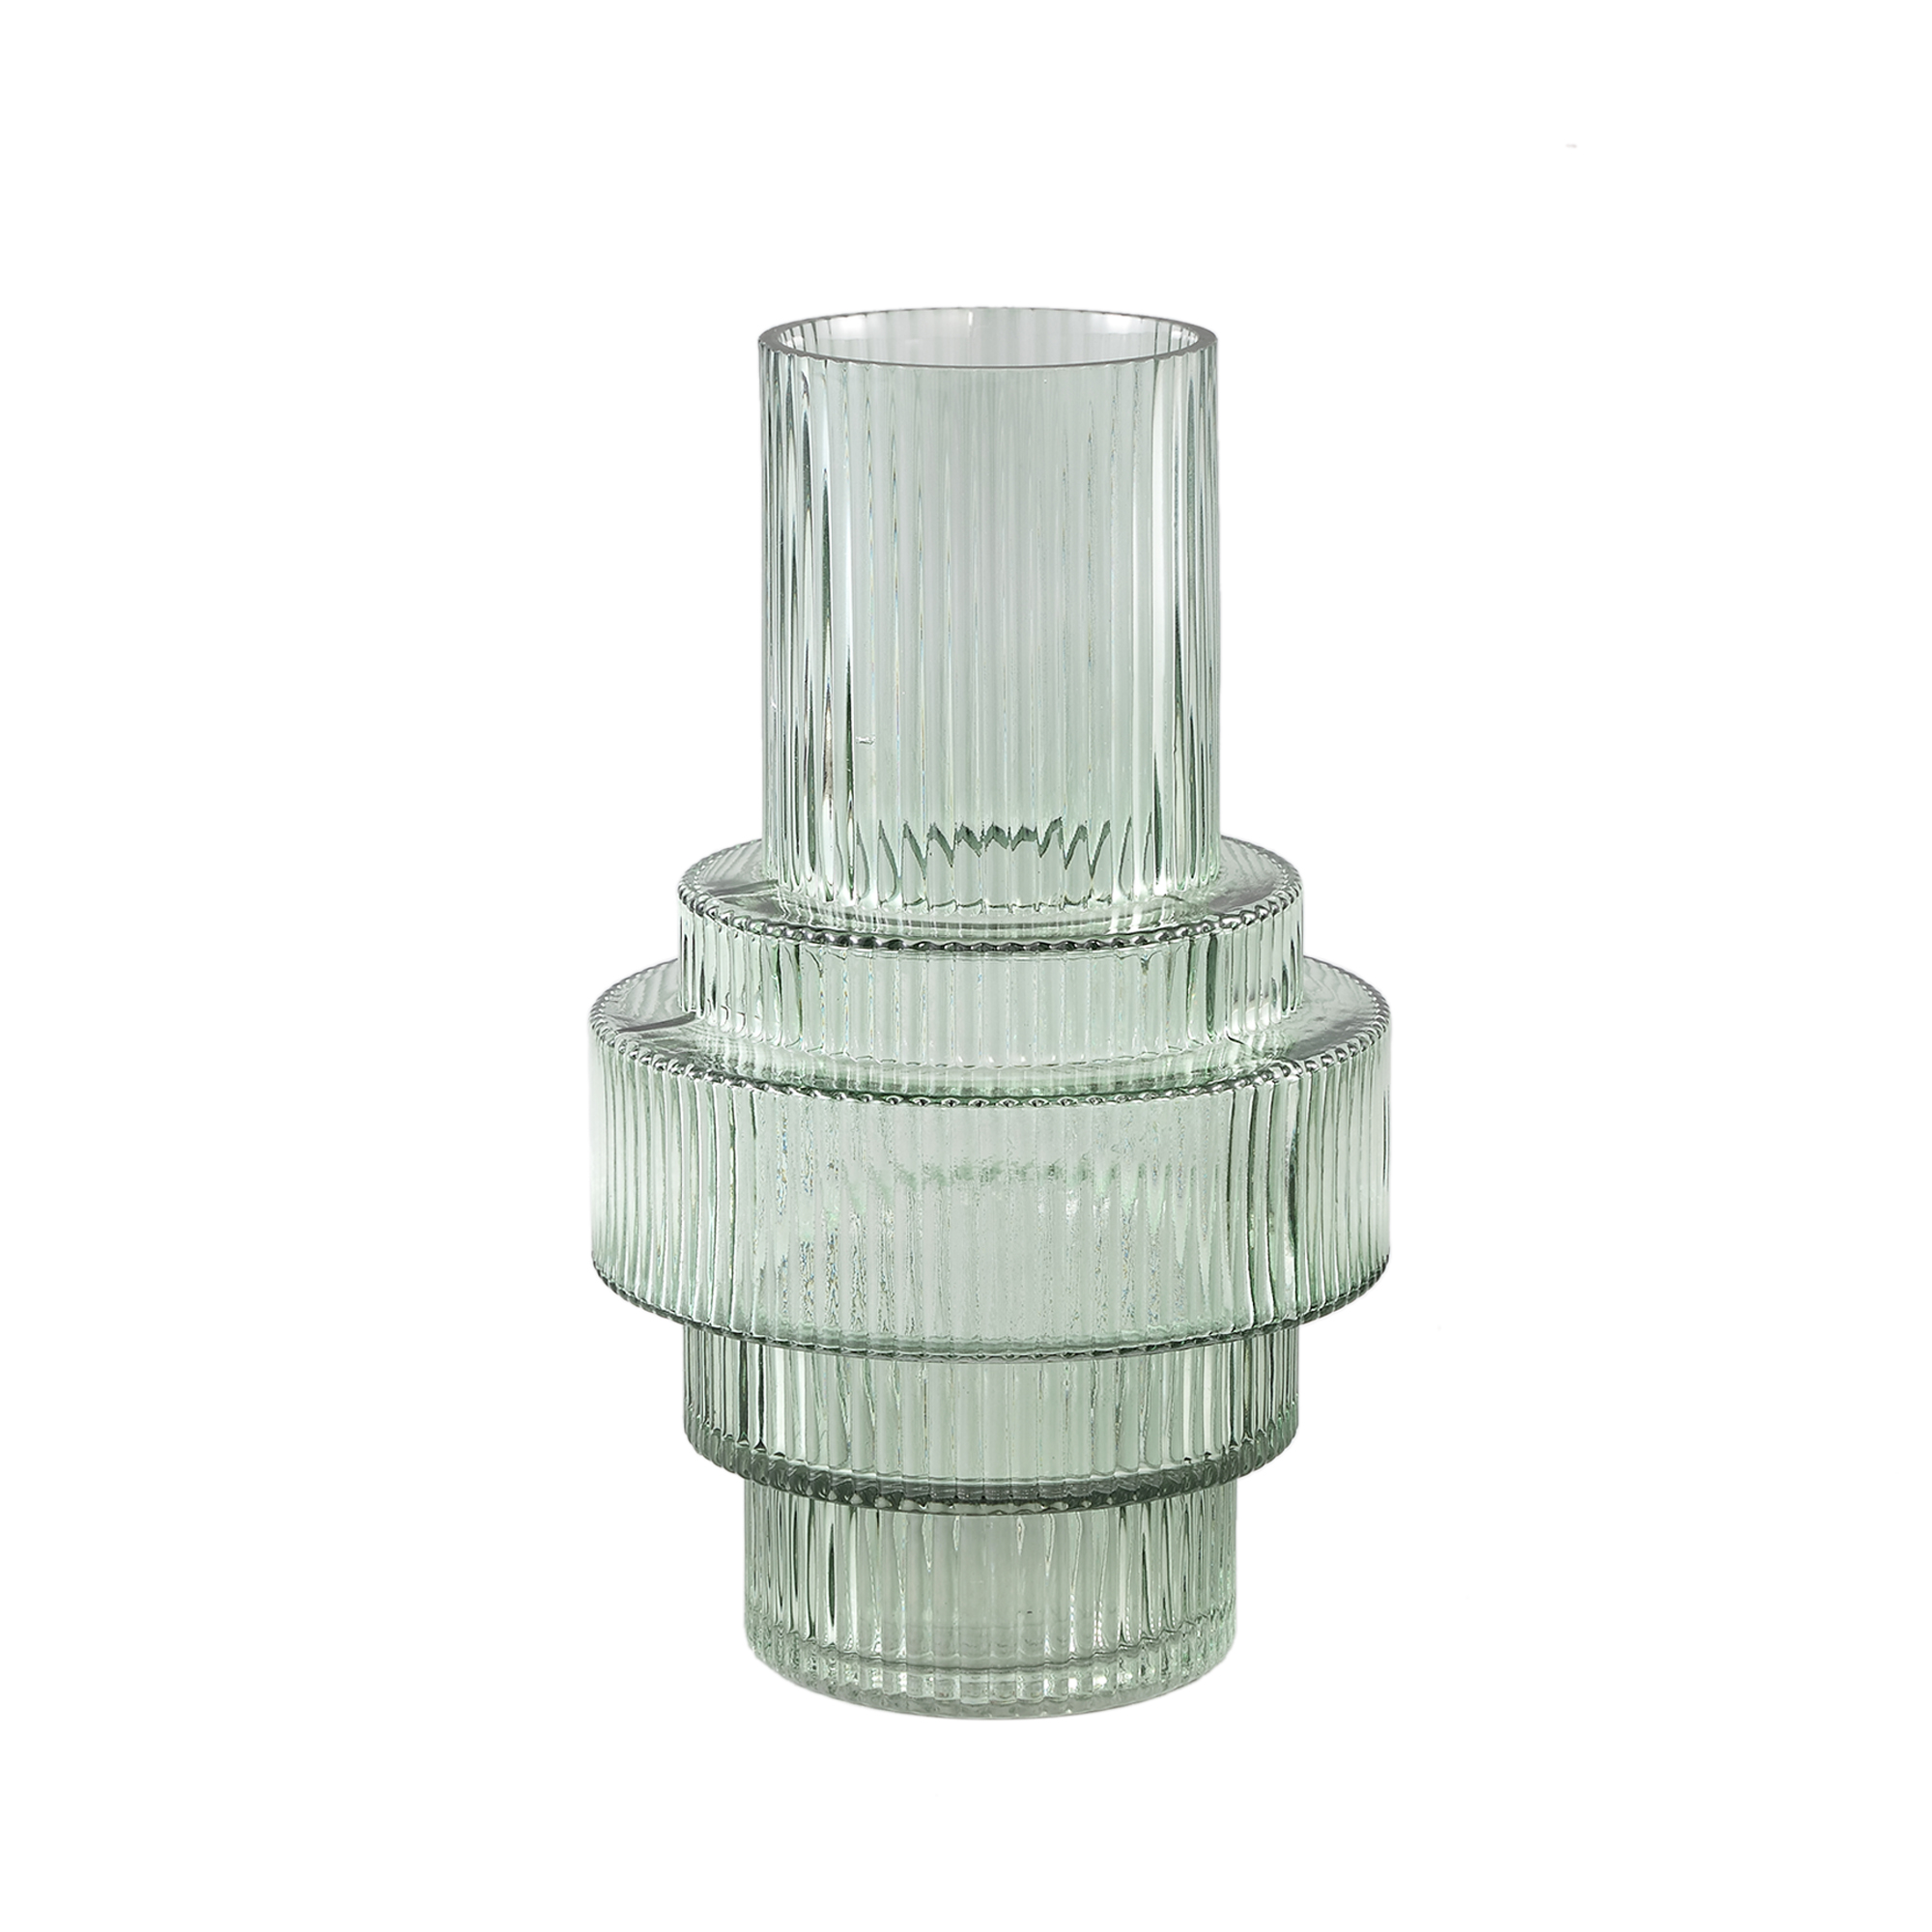 Lavine Green glass candleholder ribbed structure L